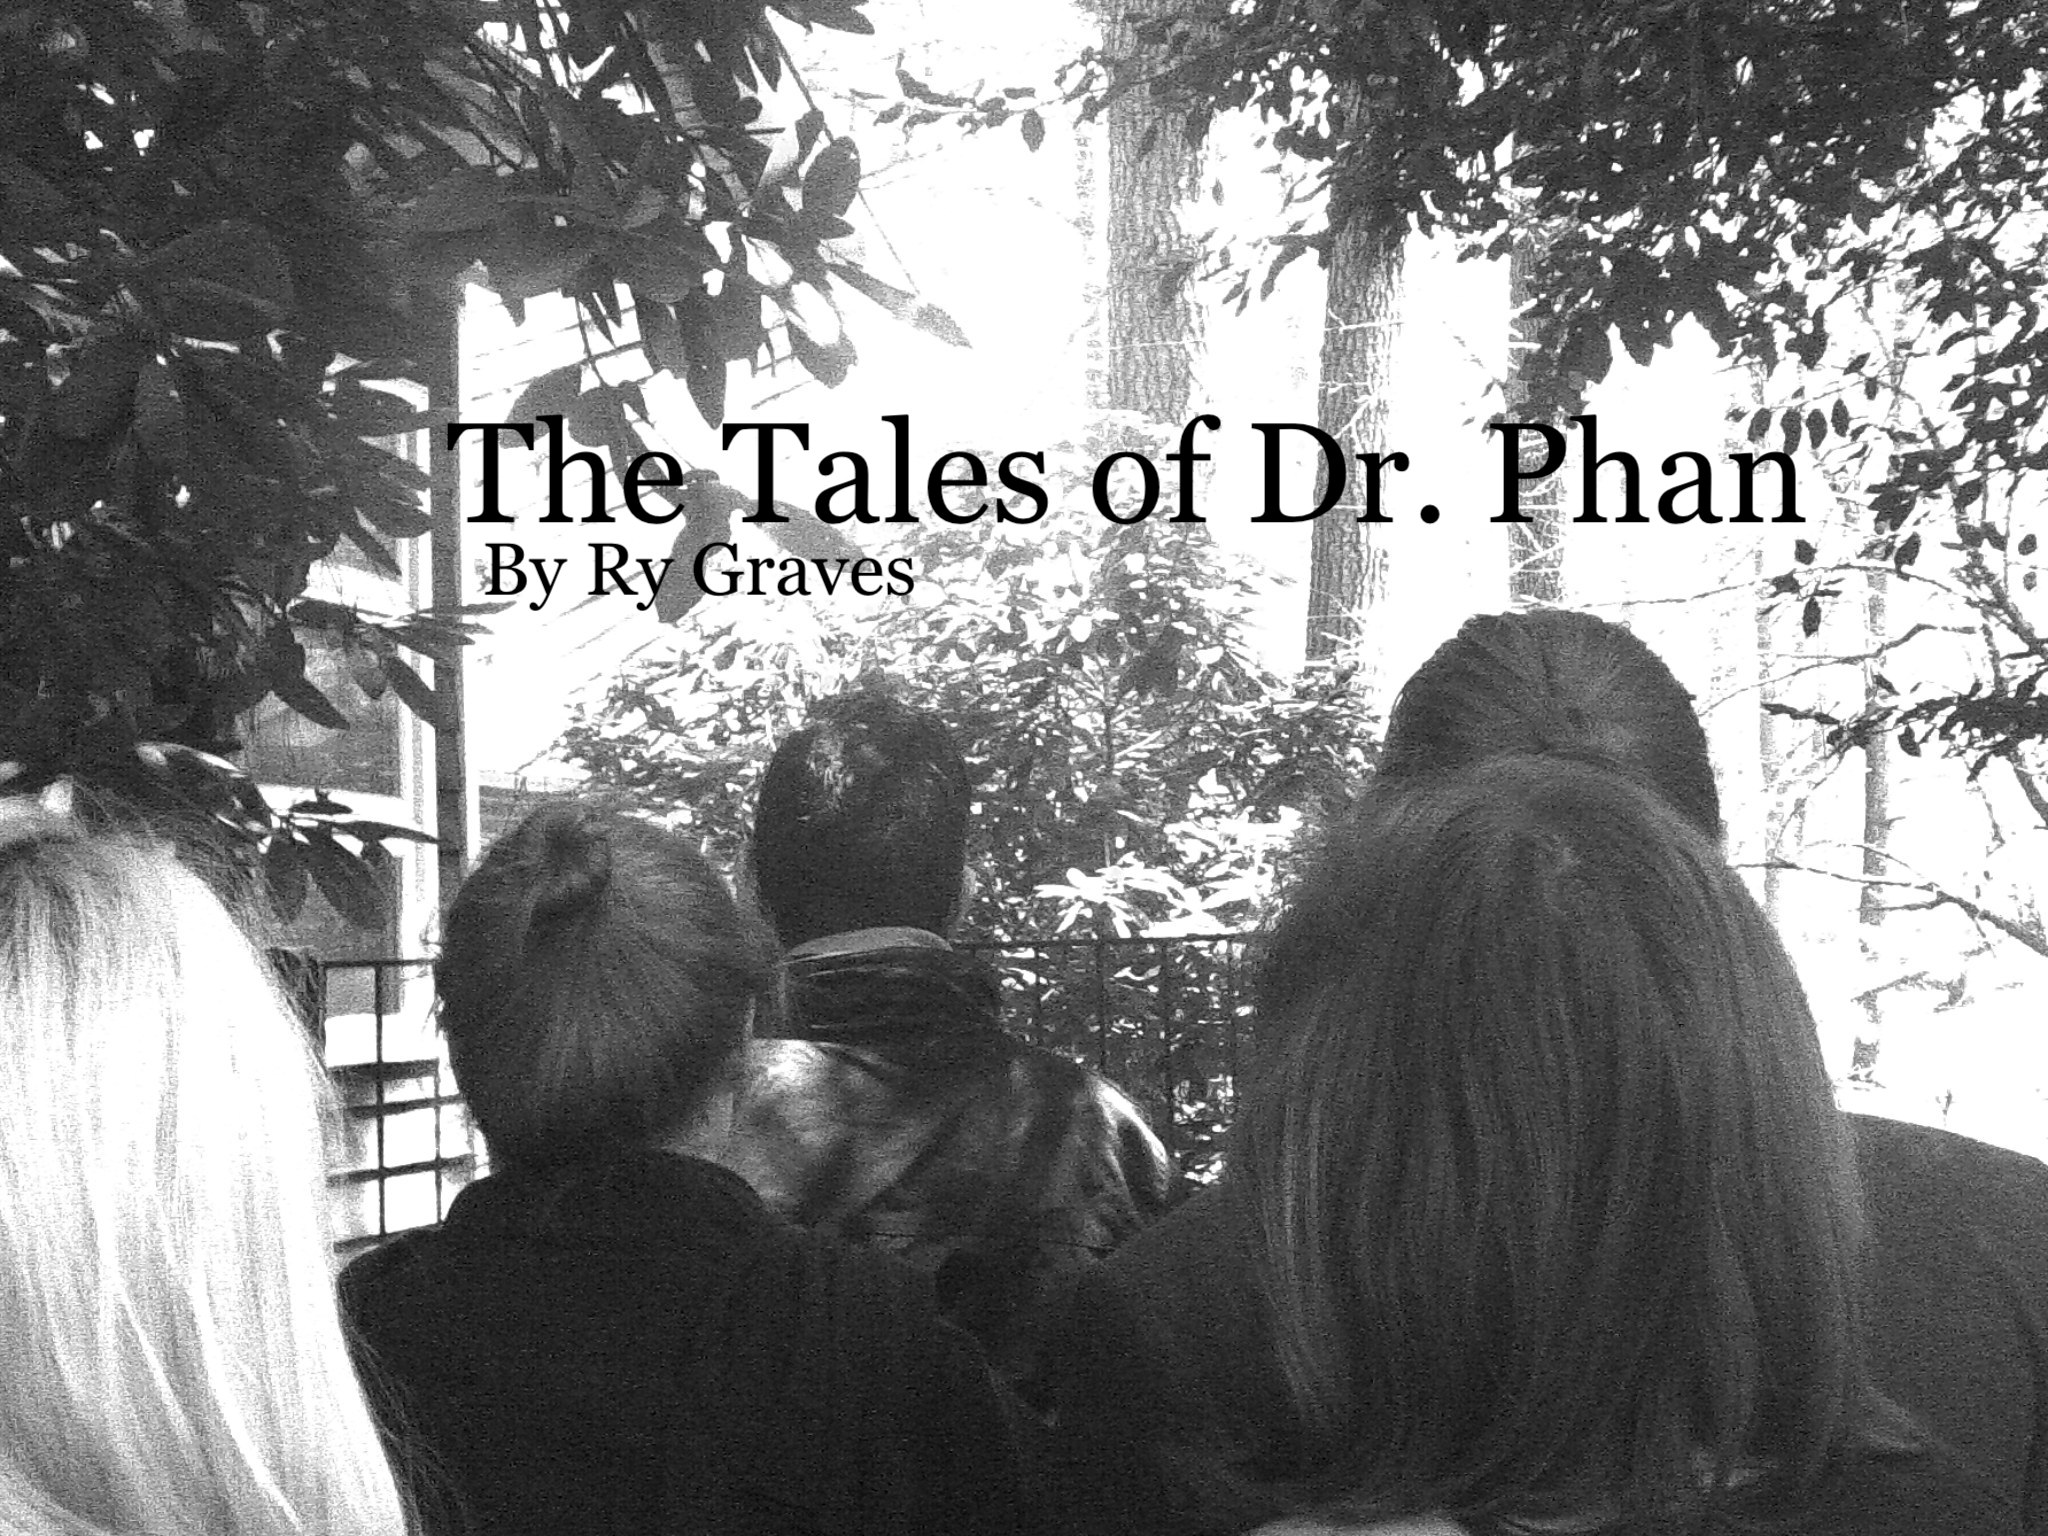 THE TALES OF DR. PHAN